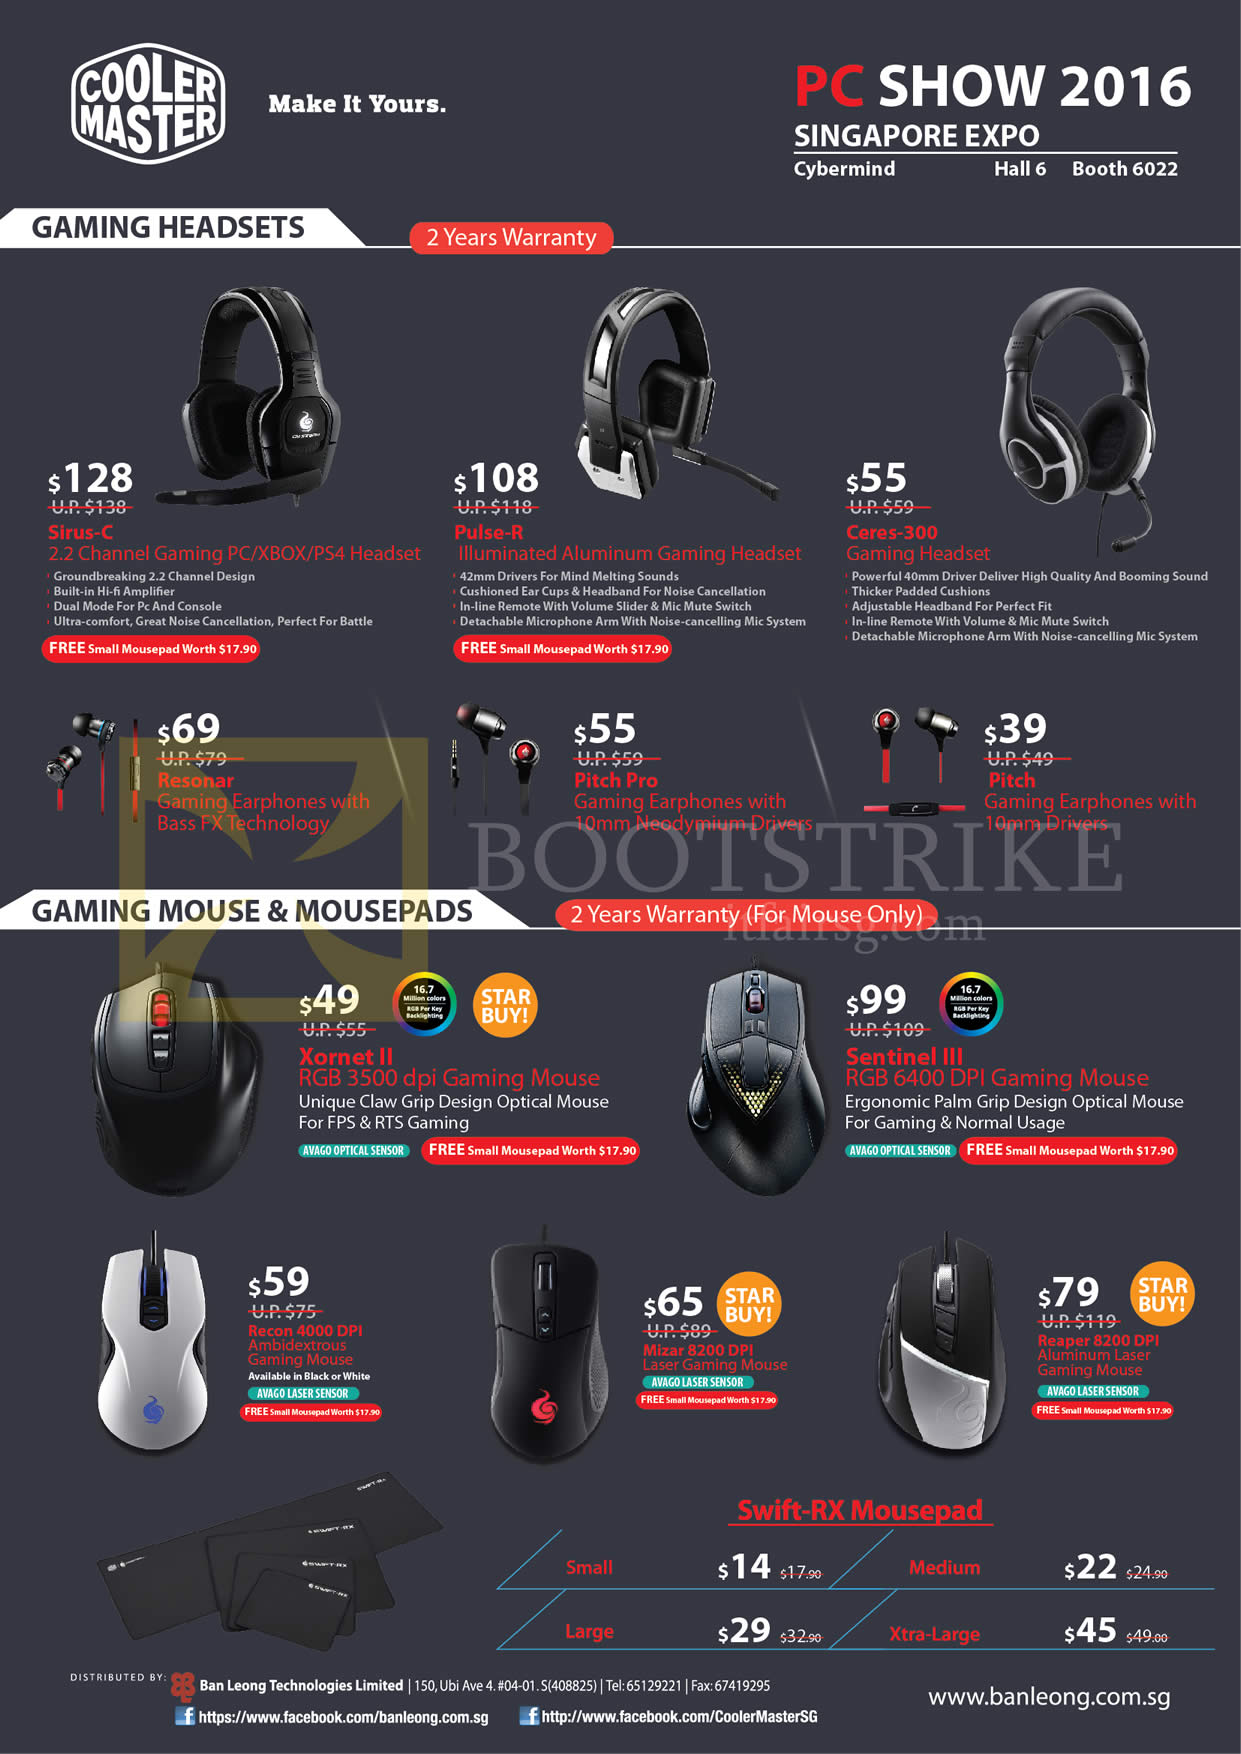 PC SHOW 2016 price list image brochure of Cybermind Cooler Master Gaming Headsets, Mouse, Mousepads, Sirus, Pulse, Ceres, Resonar, Pitch, Sentinel, Xornet, Reaper, Recon